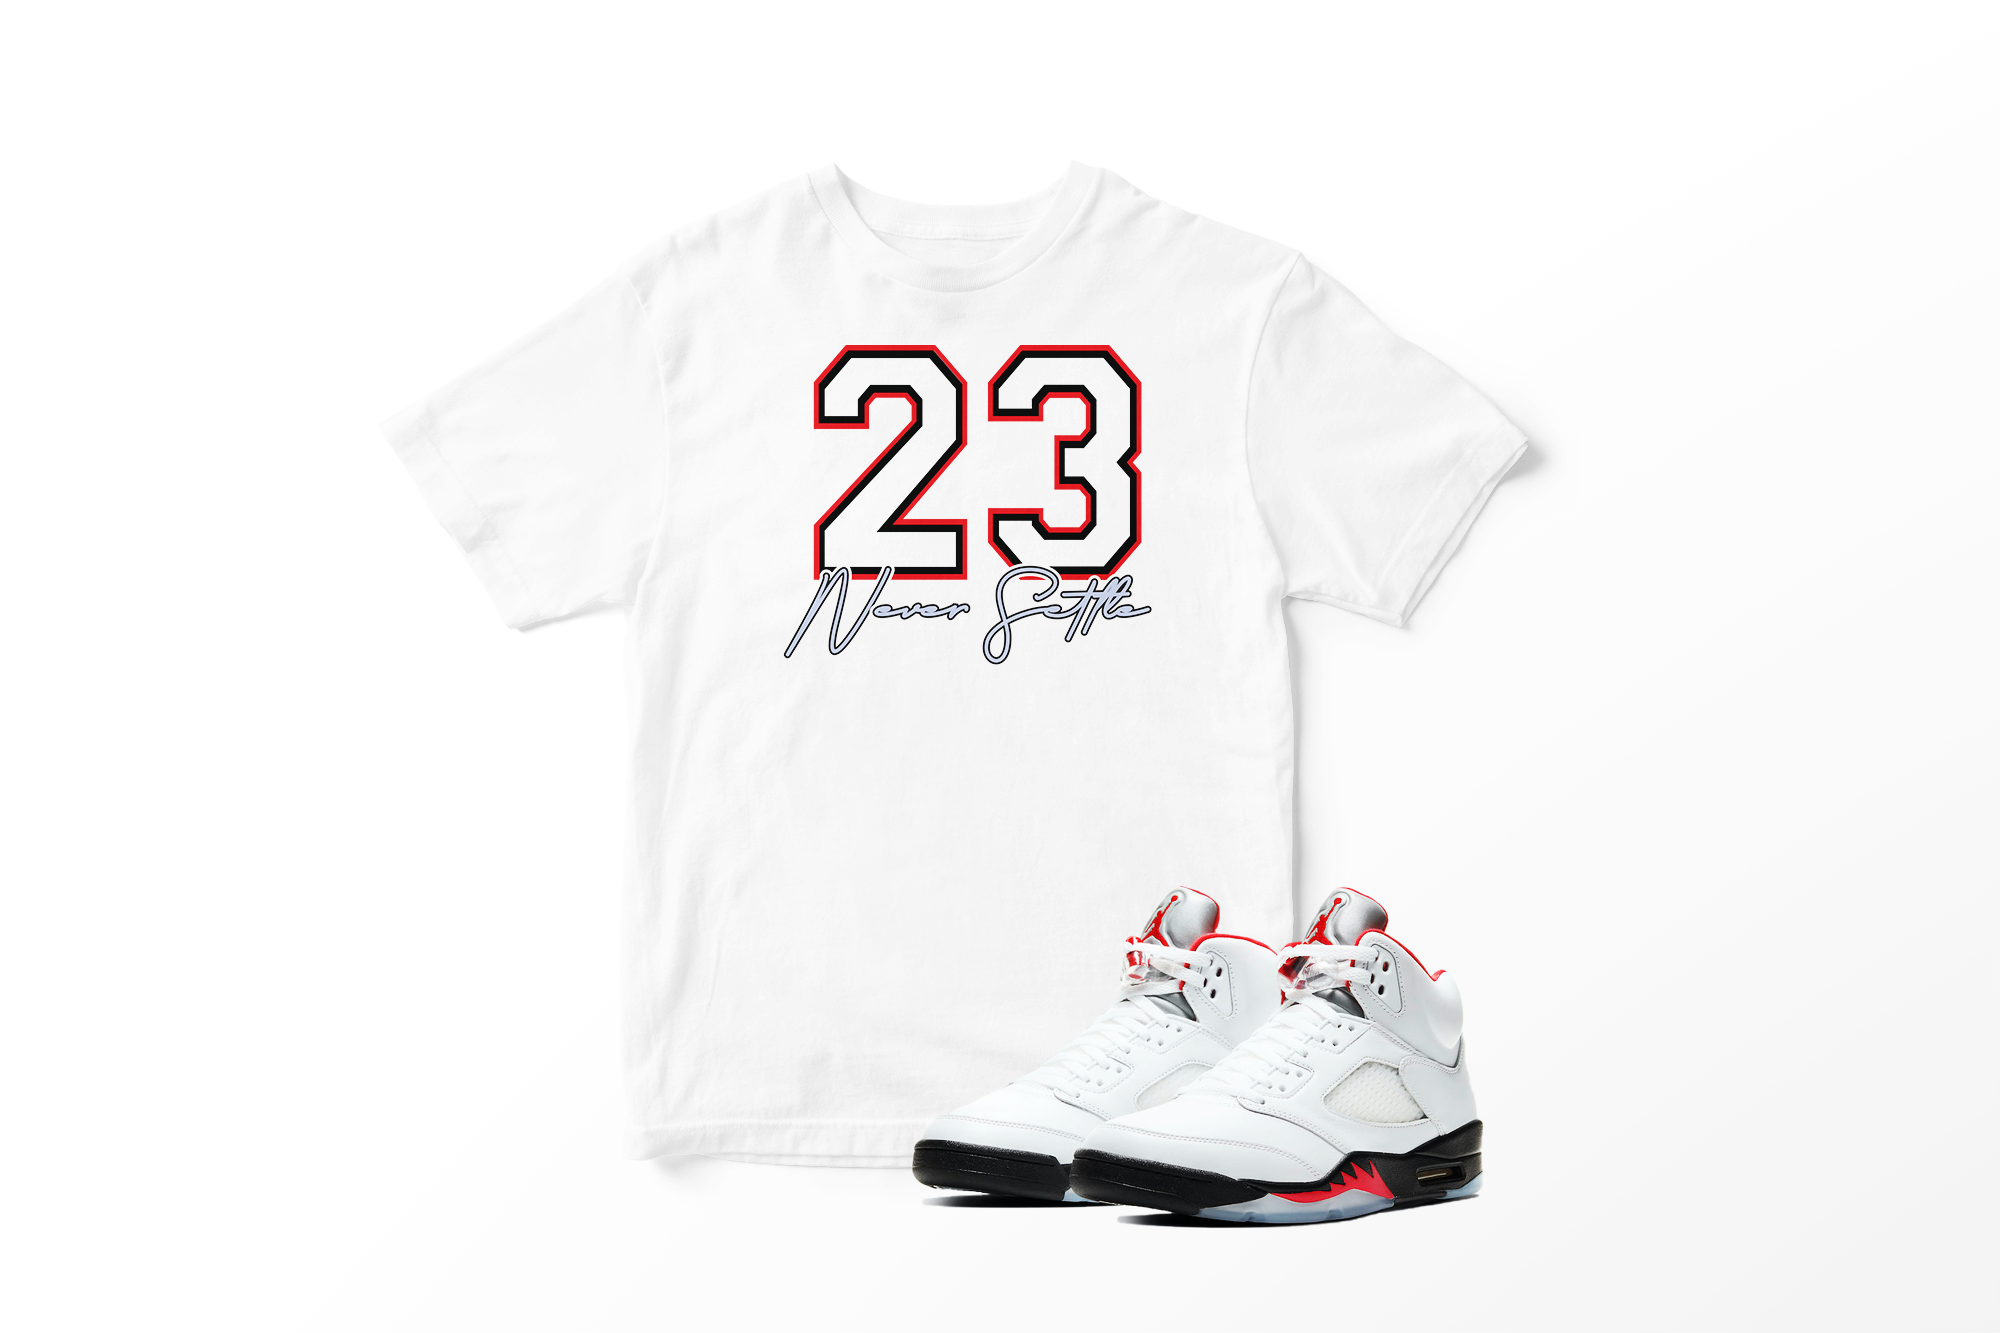 'Never Settle' in Fire Red CW Short Sleeve Tee